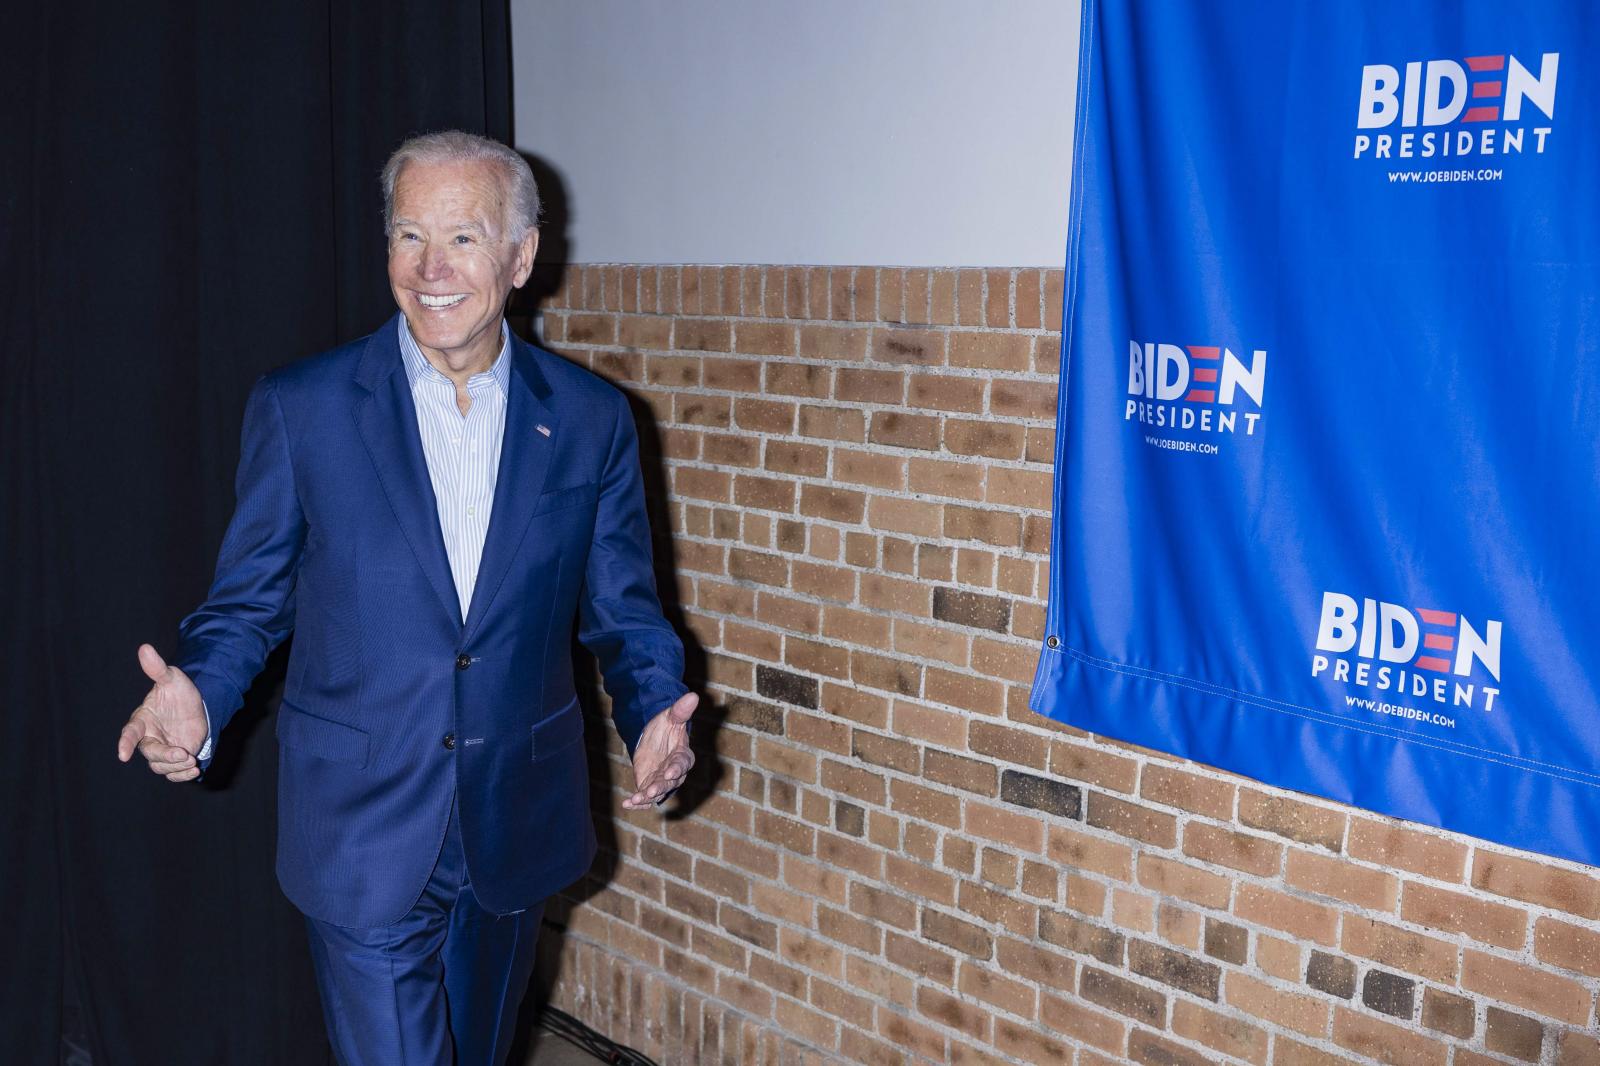 Image from Politics - Former Vice President JOE BIDEN campaigns for president...